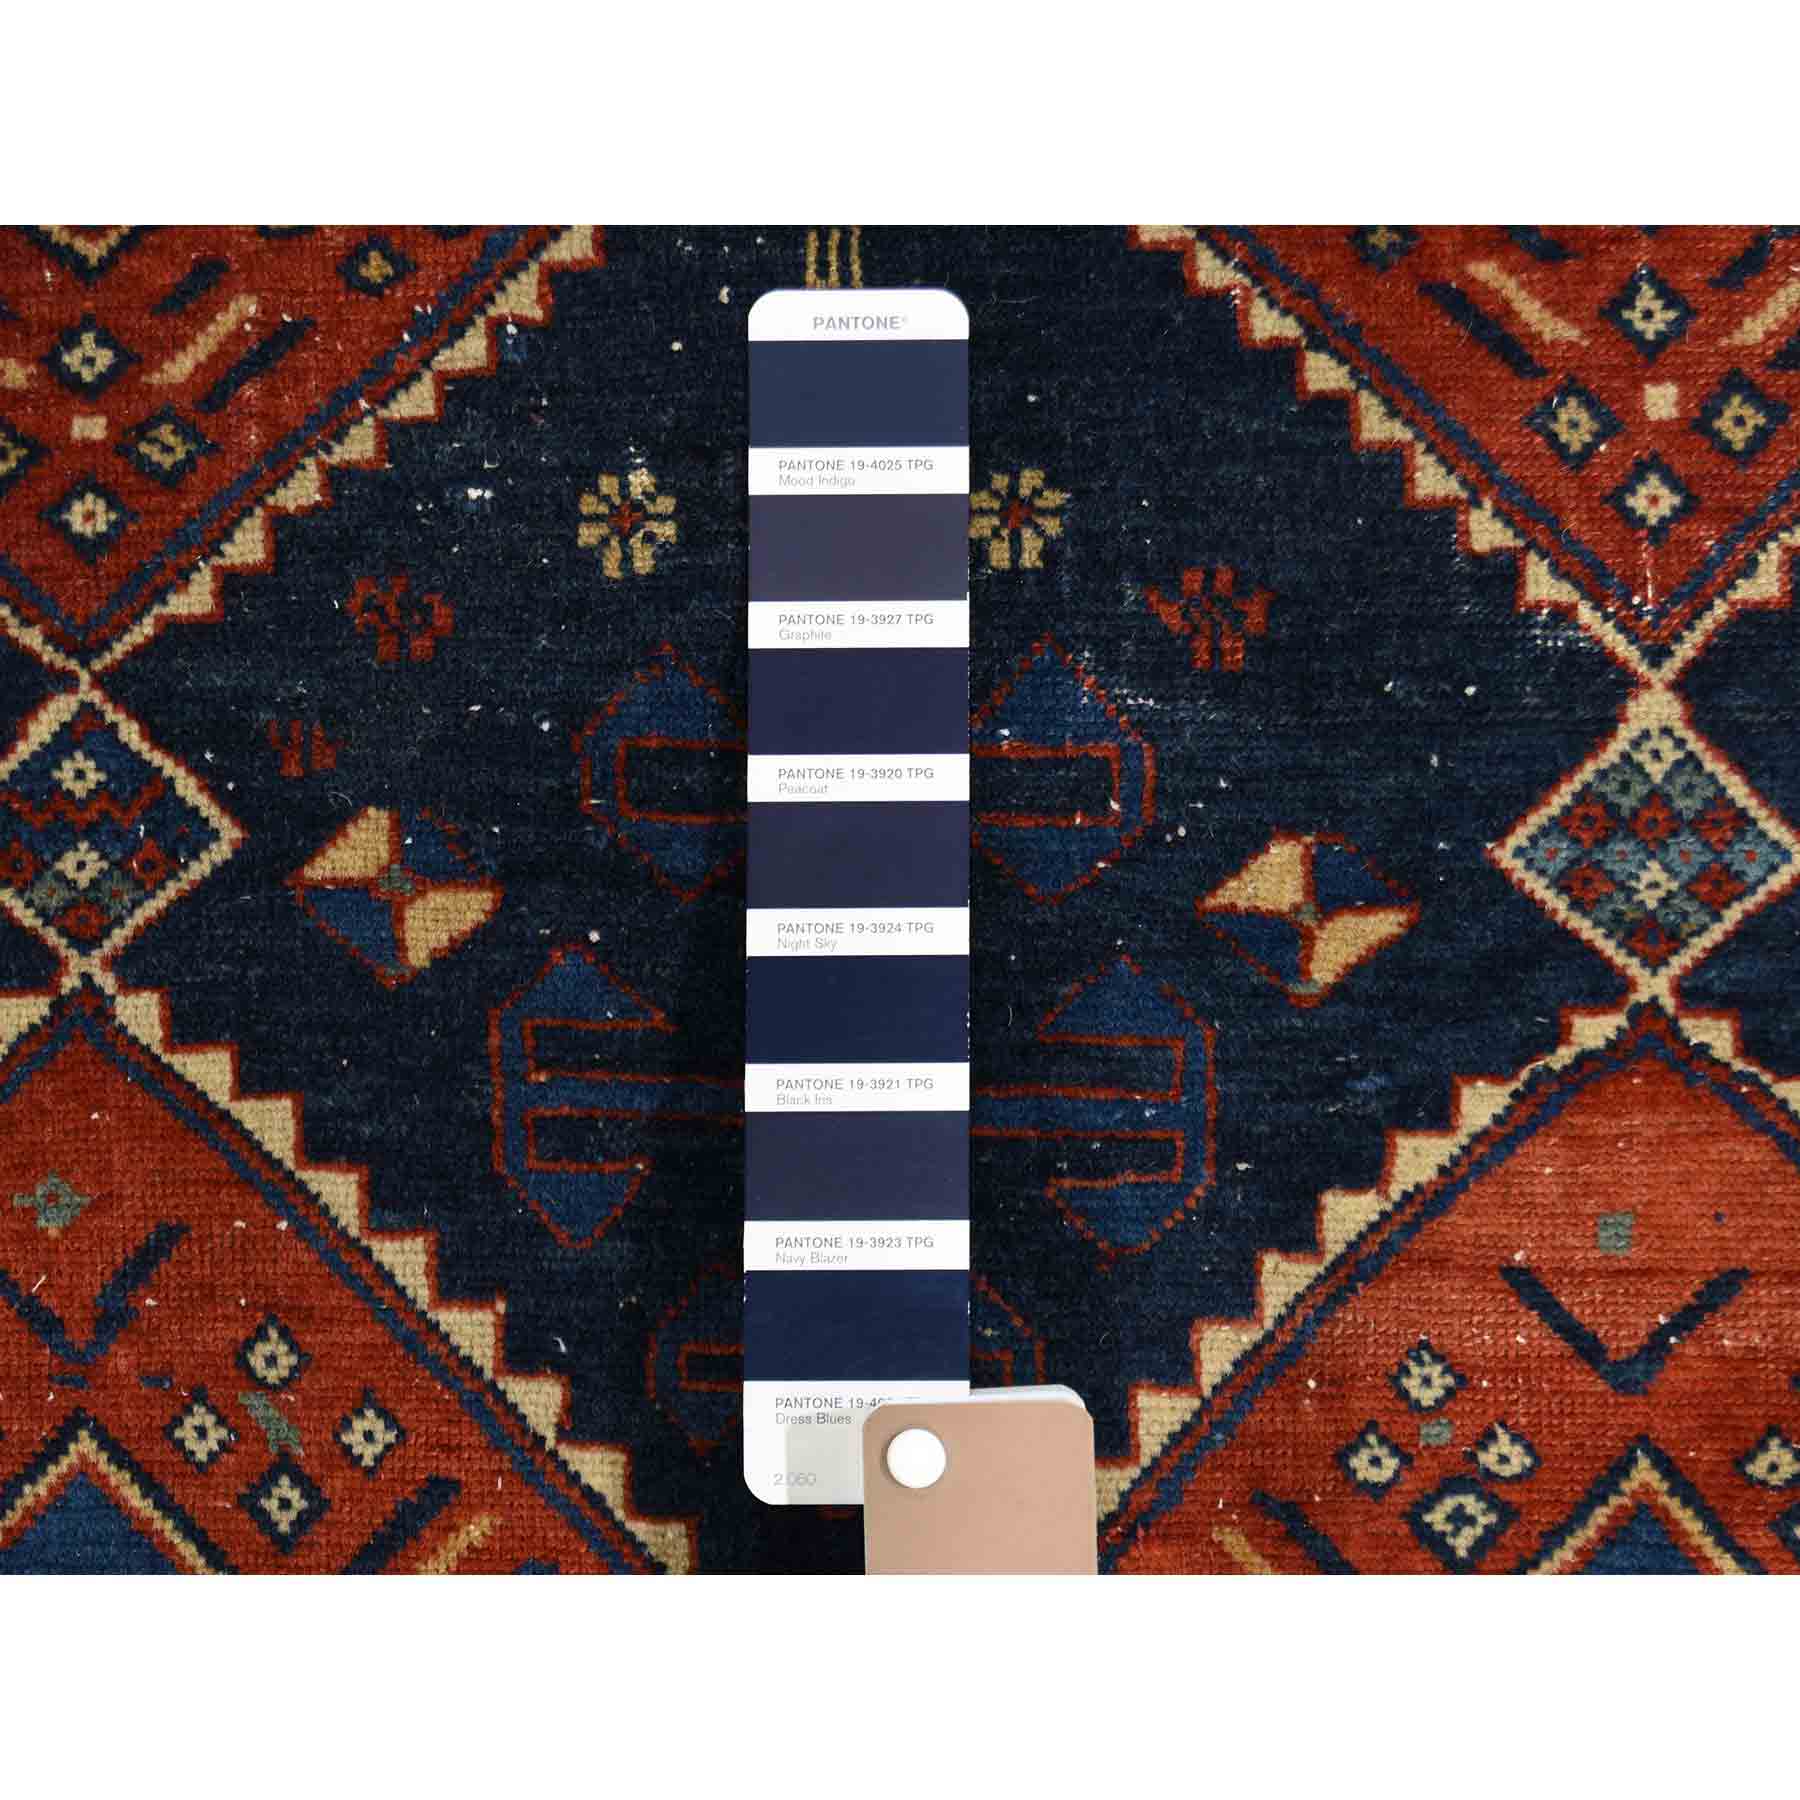 Antique-Hand-Knotted-Rug-227350